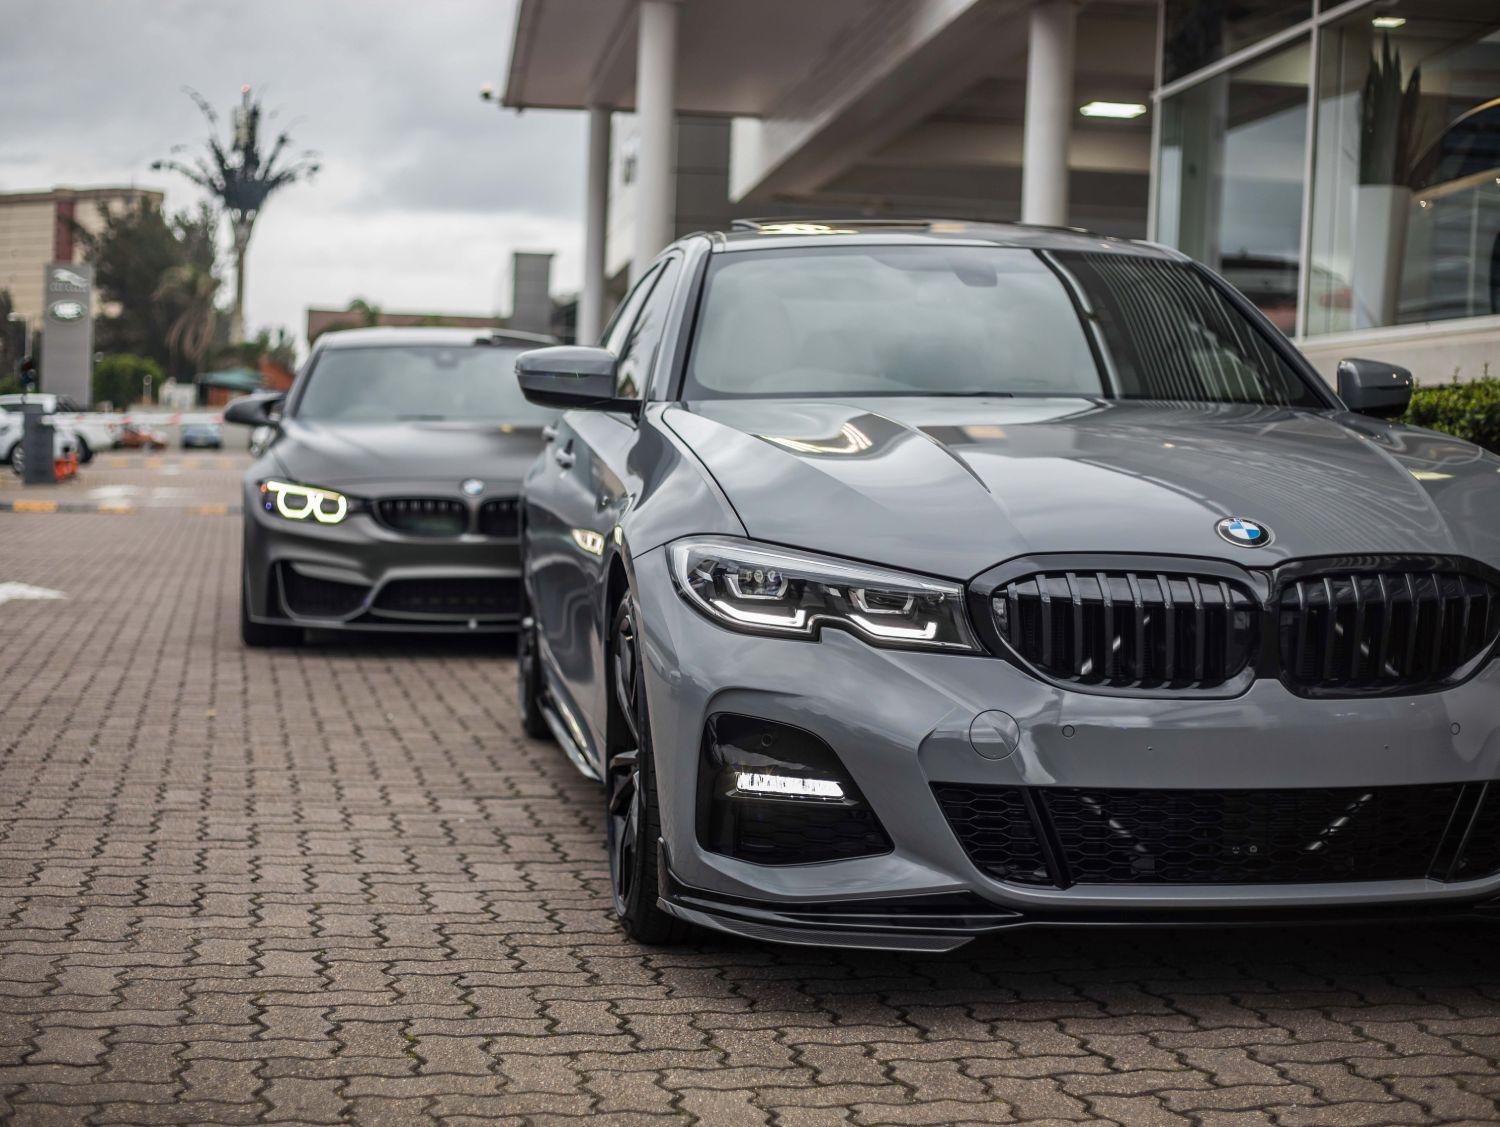 Two BMWs 